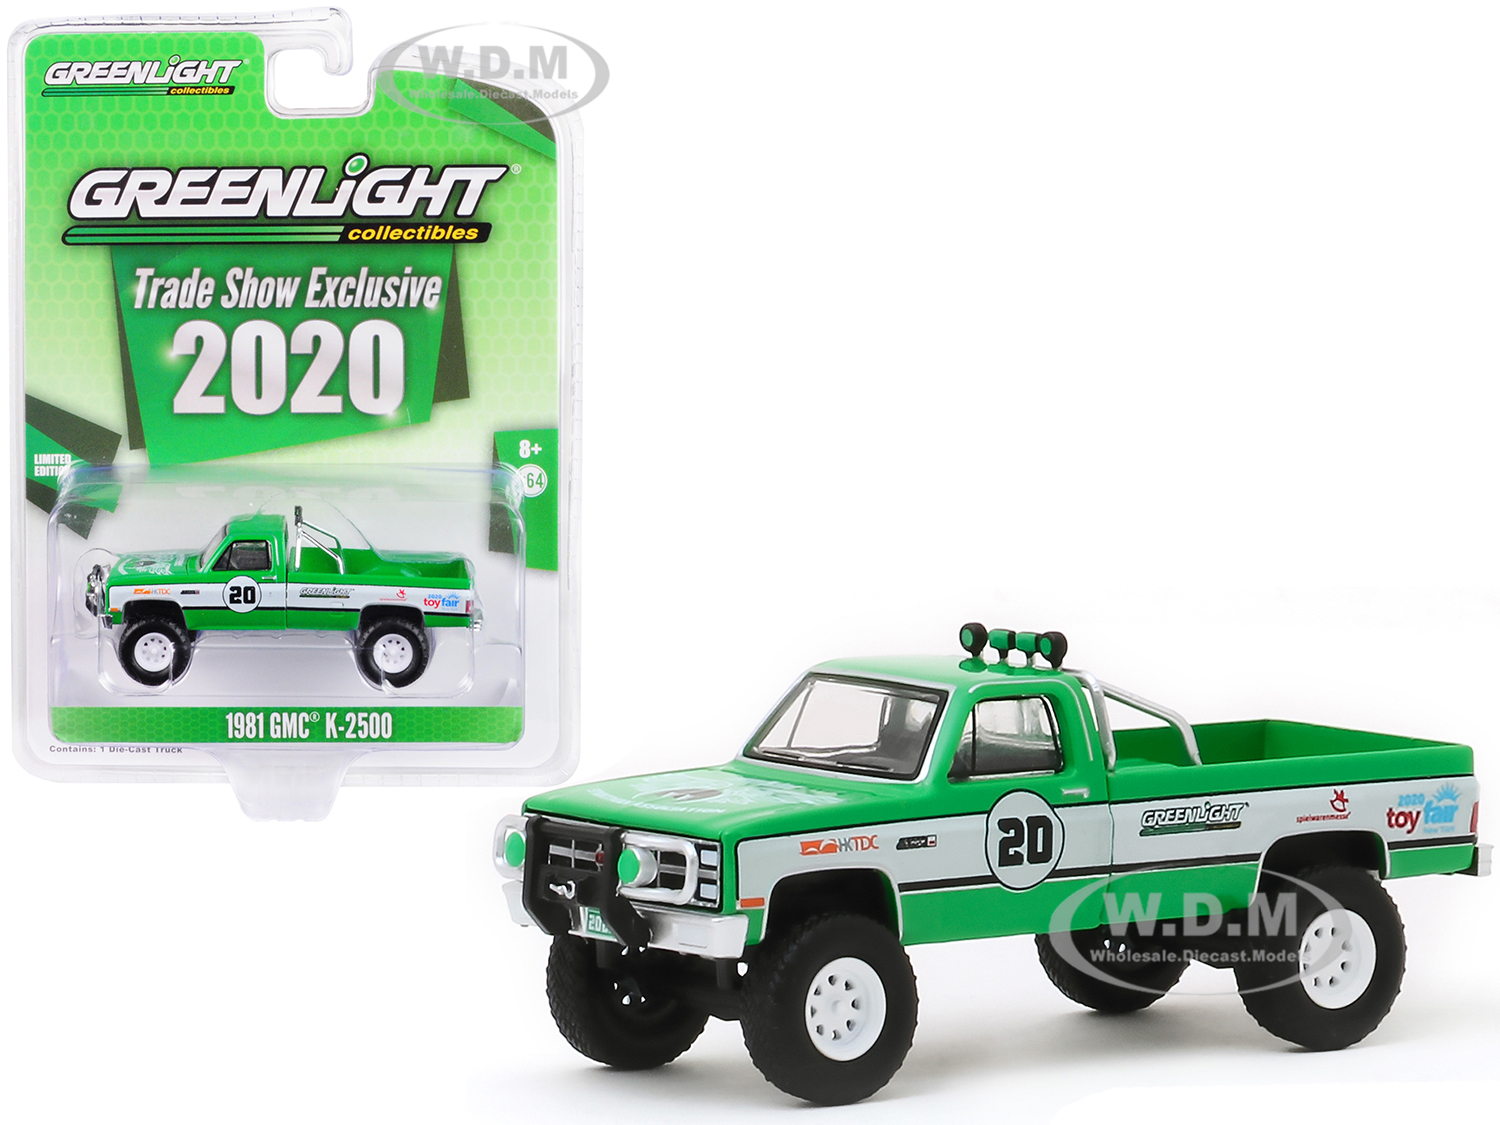 1981 Gmc K-2500 Pickup Truck 20 Green And White "greenlight Stuntman Association" "2020 Greenlight Trade Show Exclusive" 1/64 Diecast Model Car By Gr